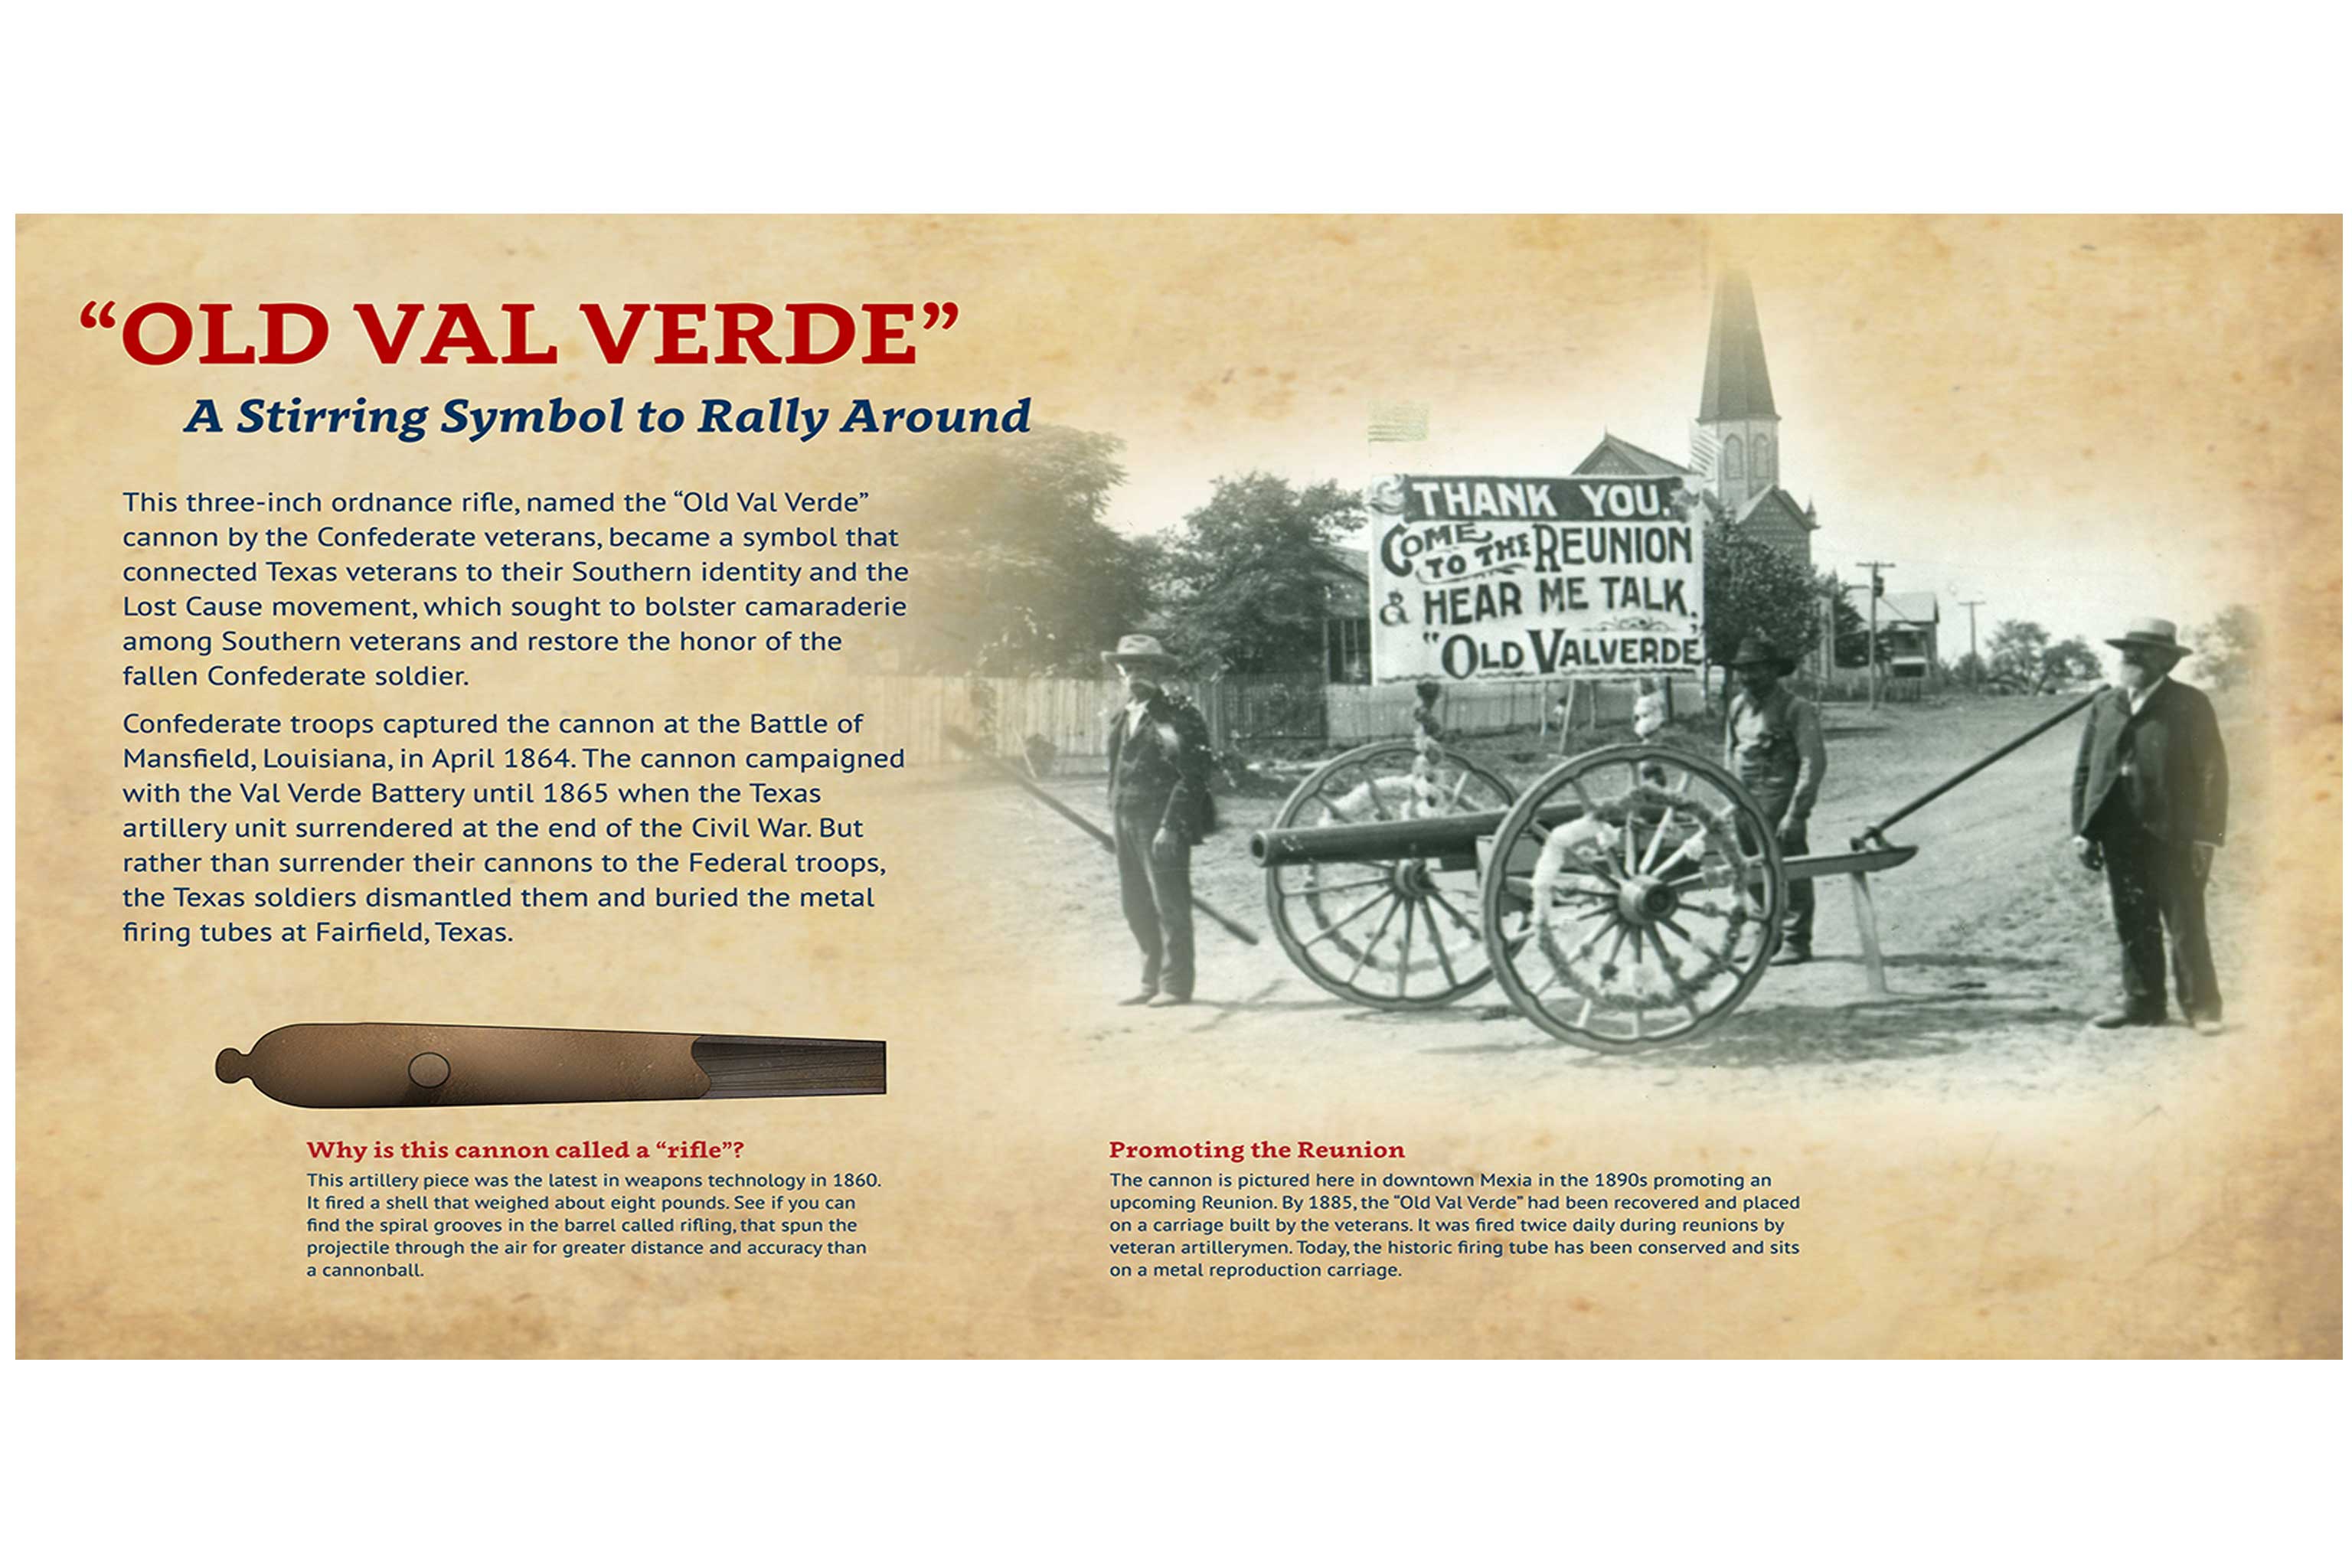 Old Val Verde, a Civil War-era cannon that Reunion Grounds campers fired to start and end each day.